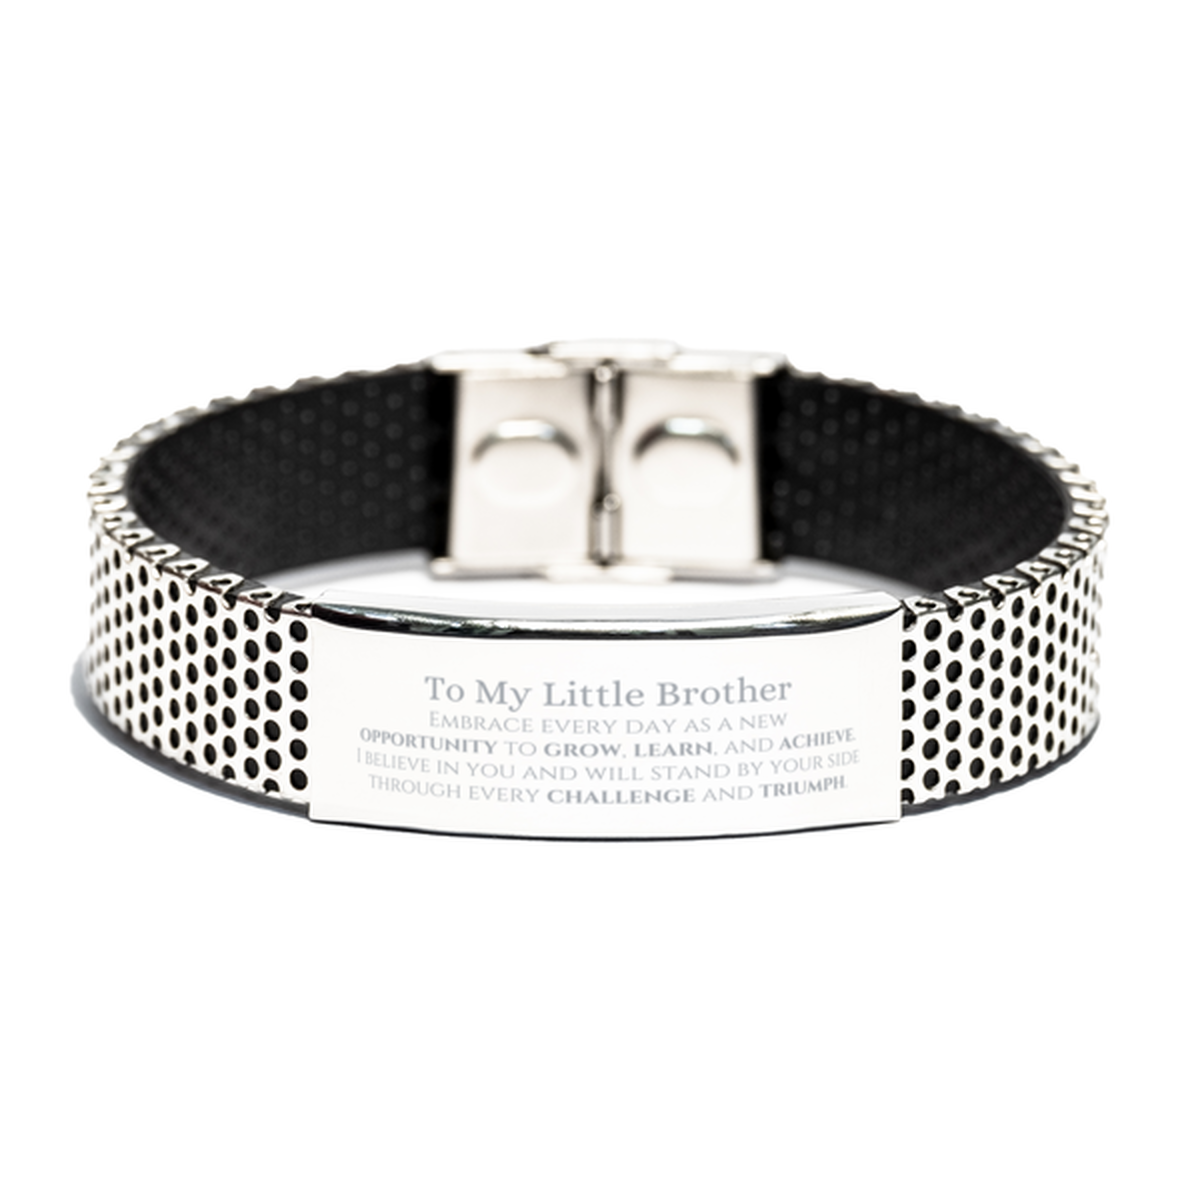 To My Little Brother Gifts, I believe in you and will stand by your side, Inspirational Stainless Steel Bracelet For Little Brother, Birthday Christmas Motivational Little Brother Gifts